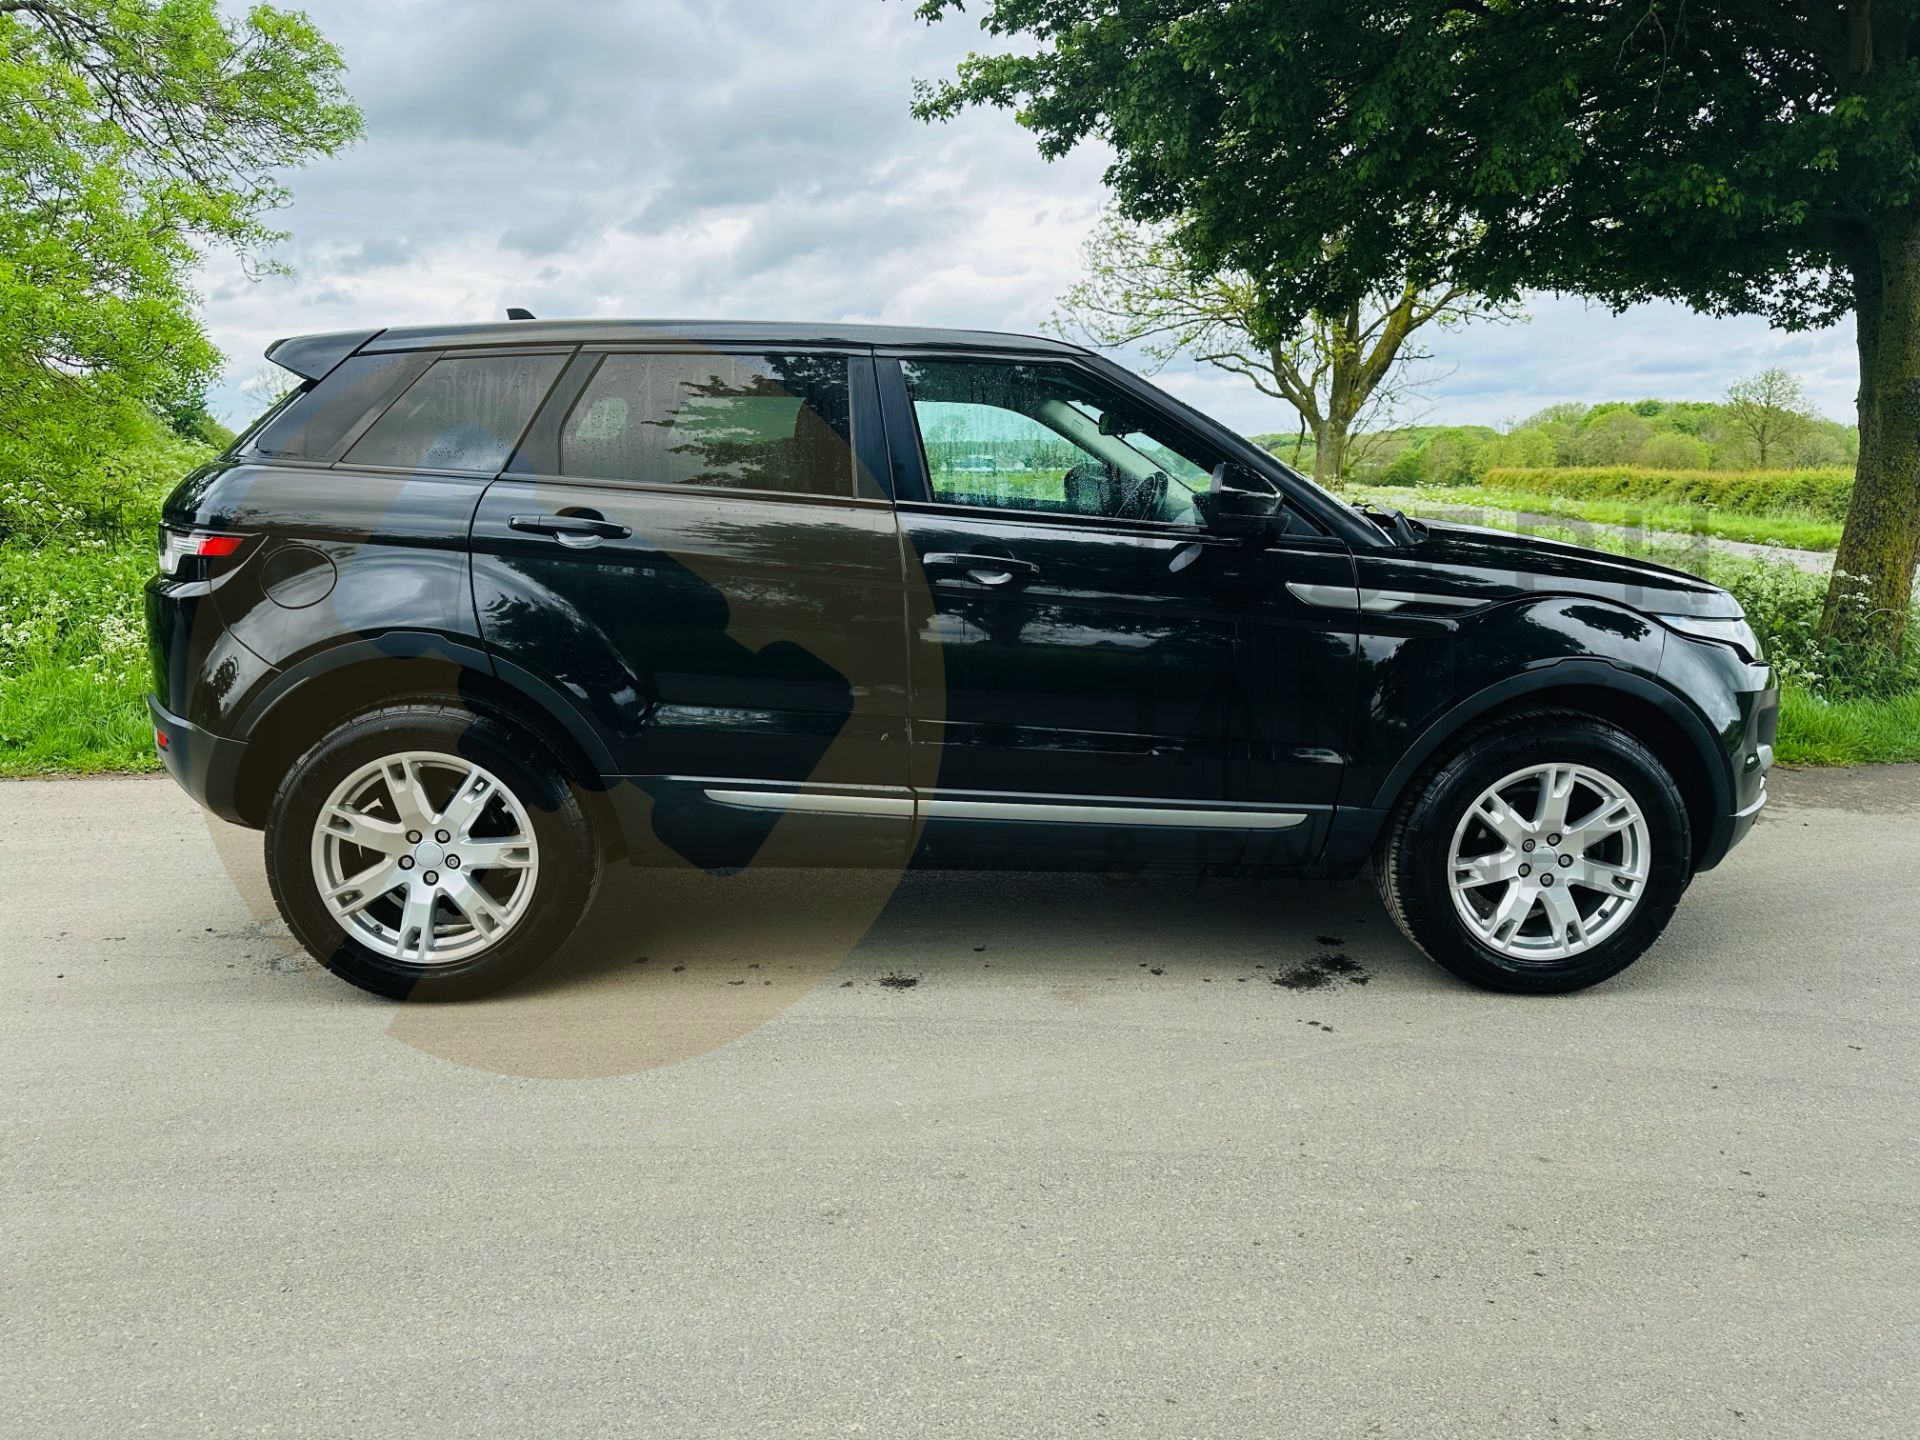 (ON SALE) RANGE ROVER EVOQUE 2.2 ED4 *PURE EDITION* - 2015 MODEL - START / STOP - LEATHER - Image 12 of 39